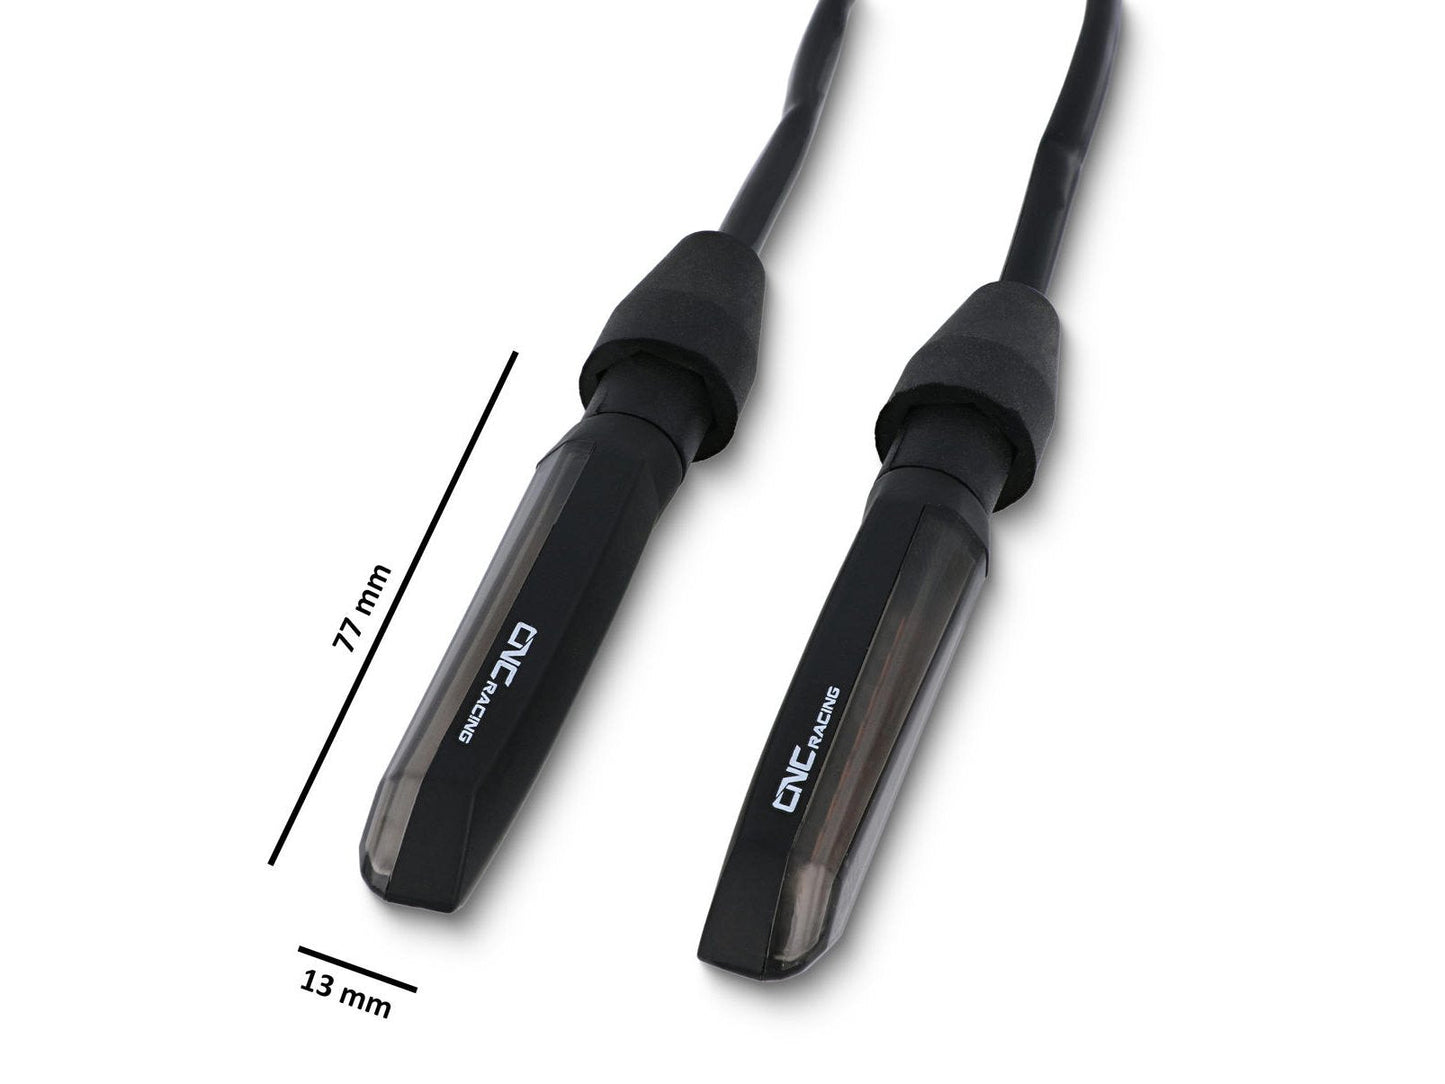 ID020 - CNC RACING LED Turn Indicators "Sequential Flow"